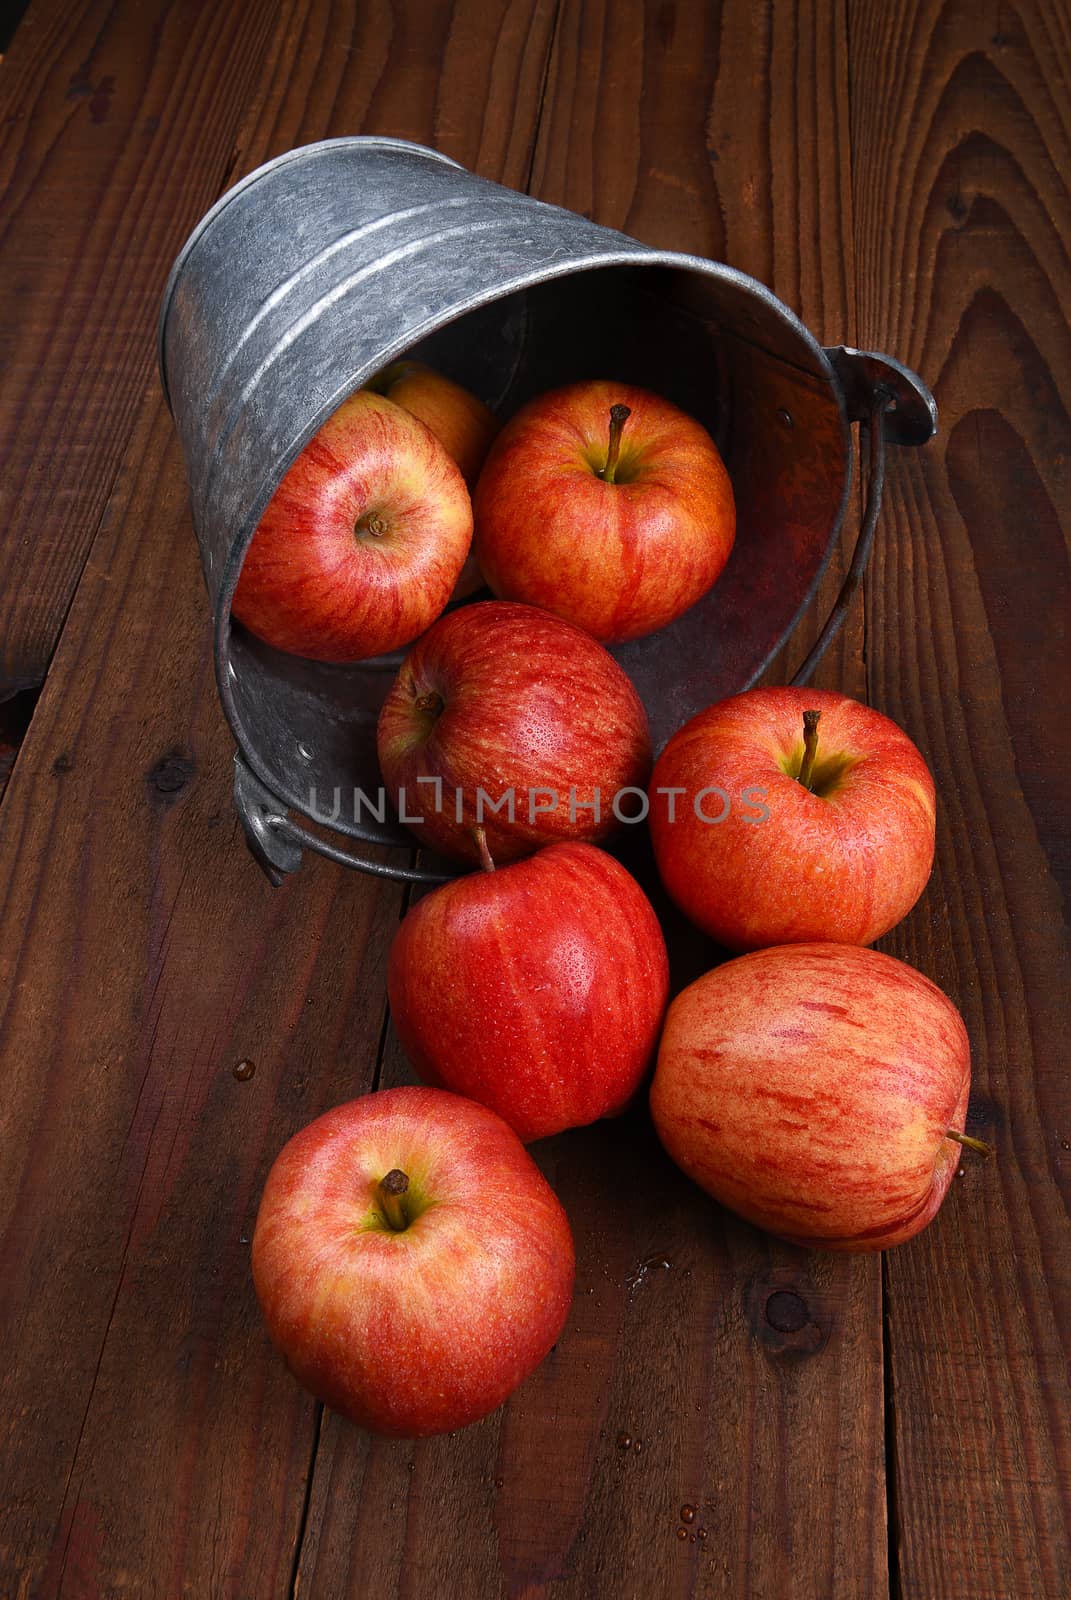 Apples Spilling from Bucket by sCukrov